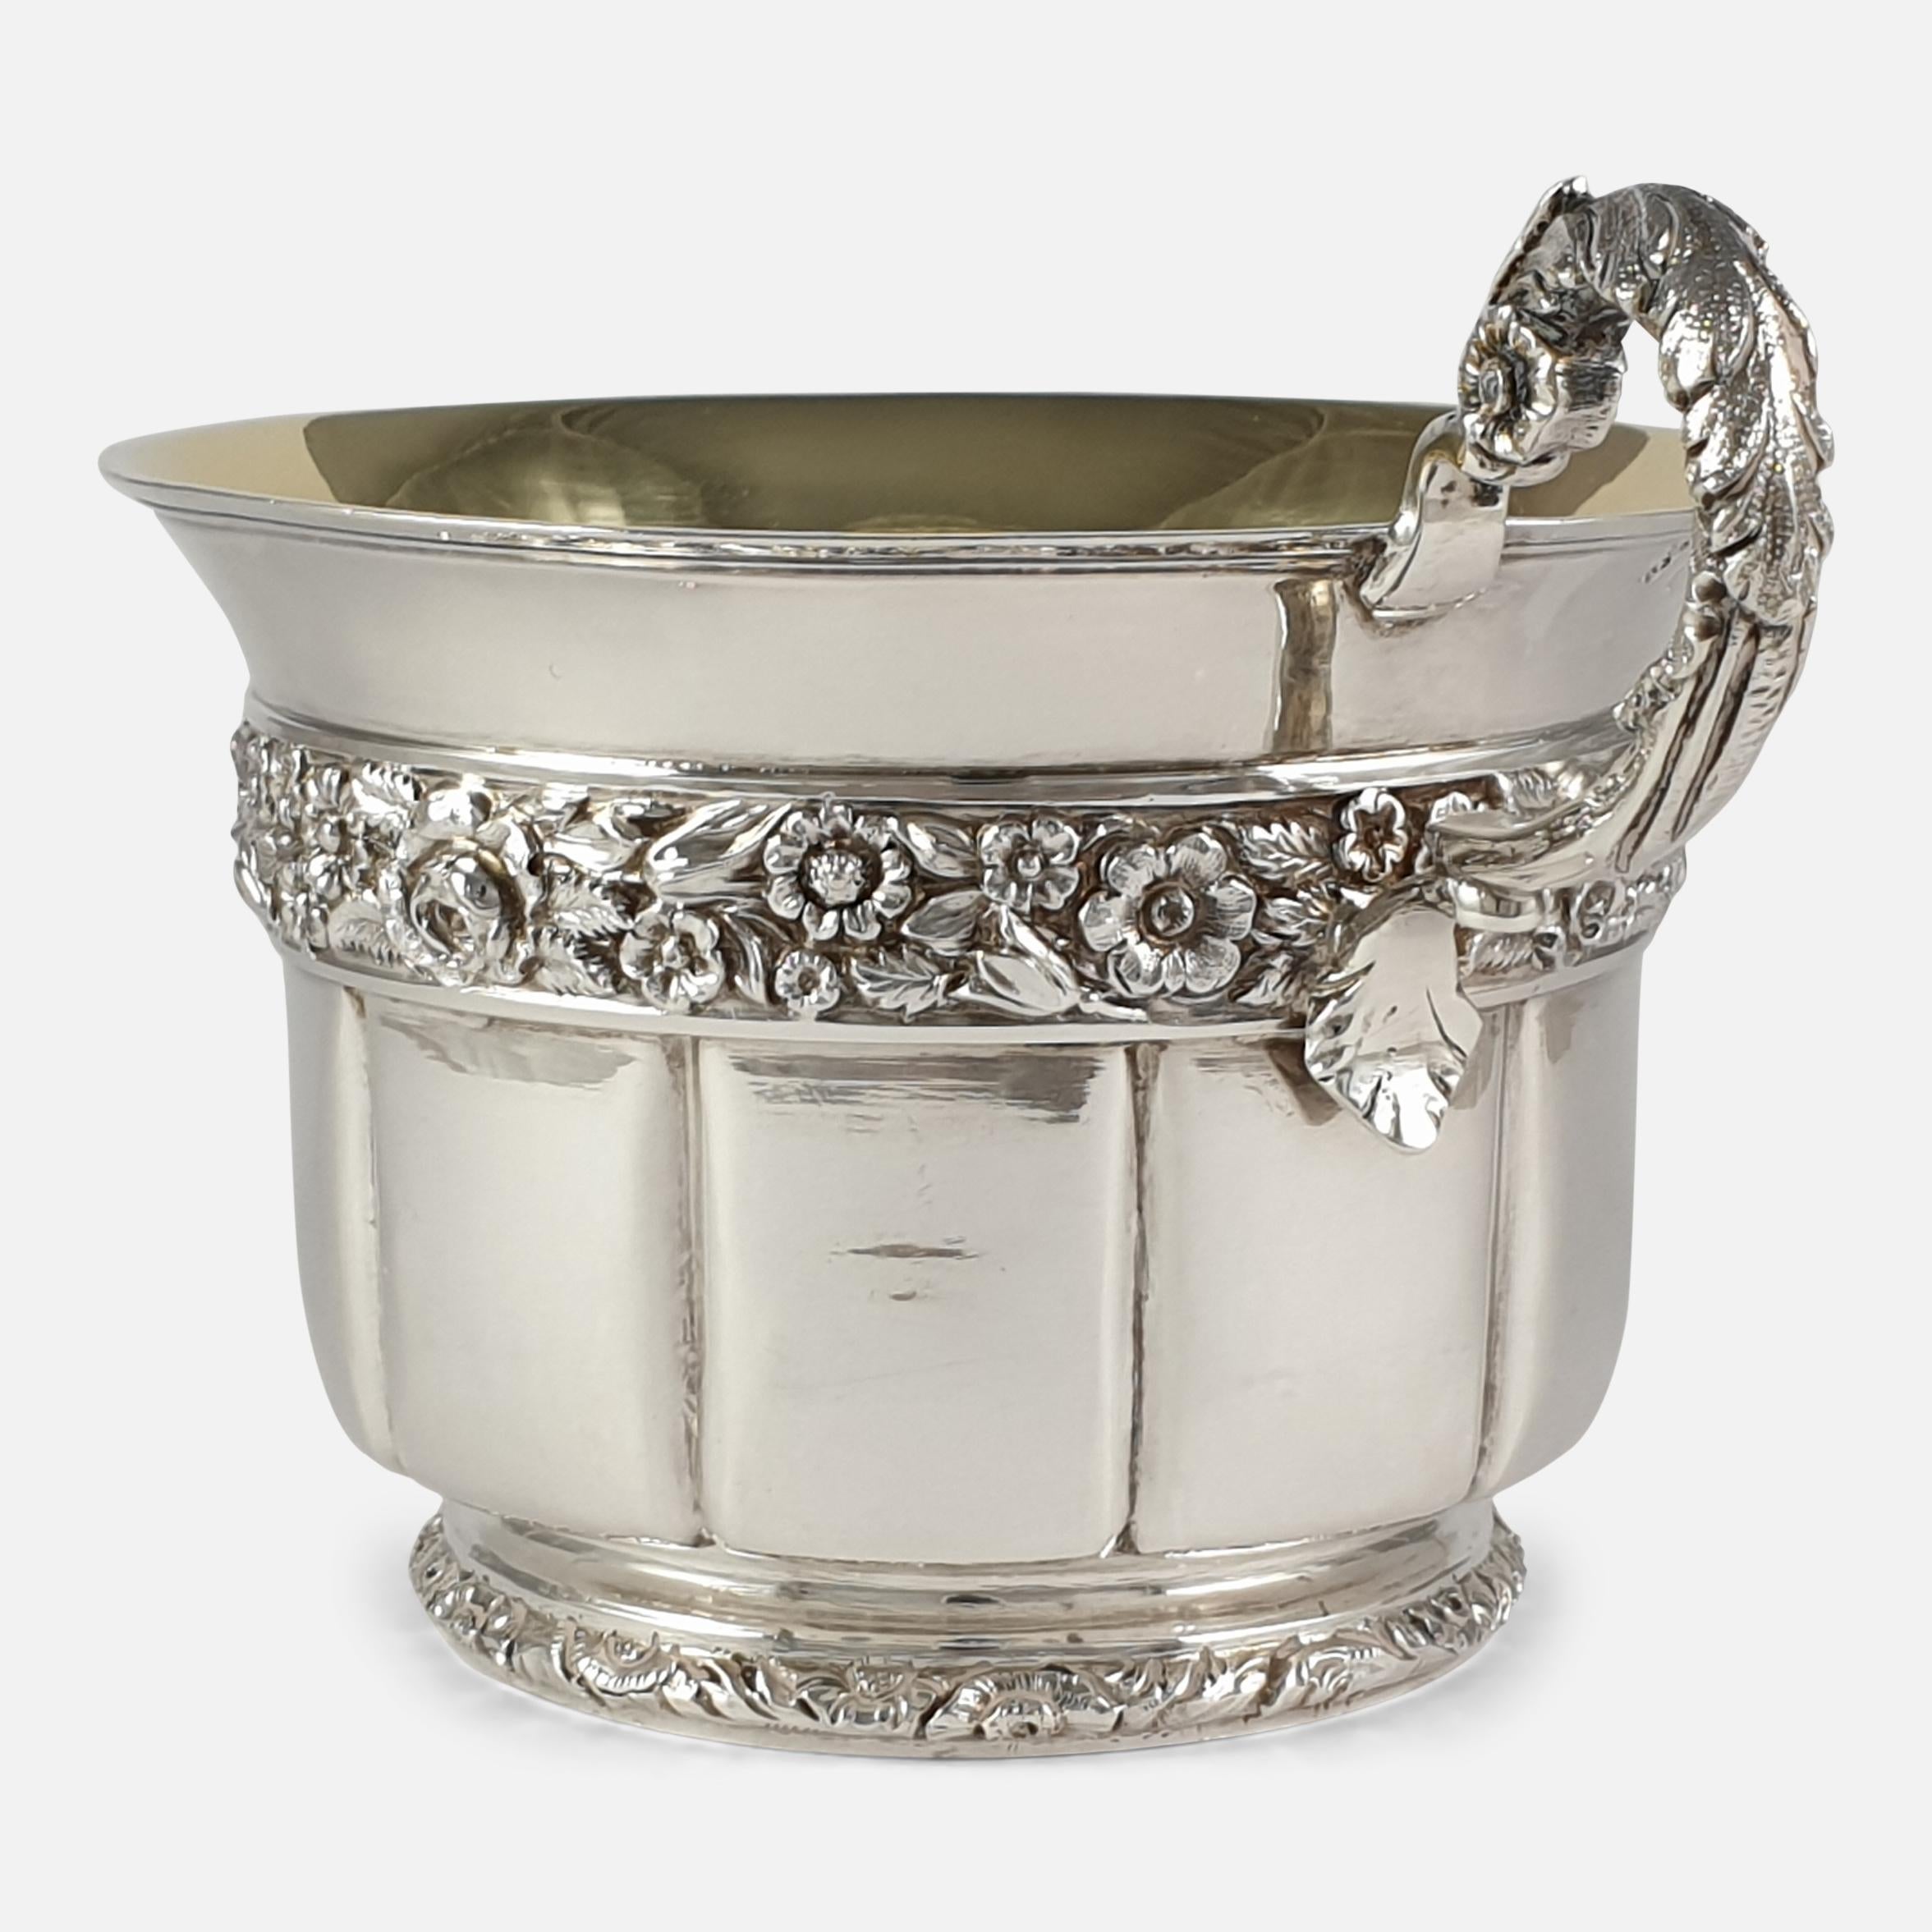 British George IV Sterling Silver Gilt Christening Cup, London, 1828